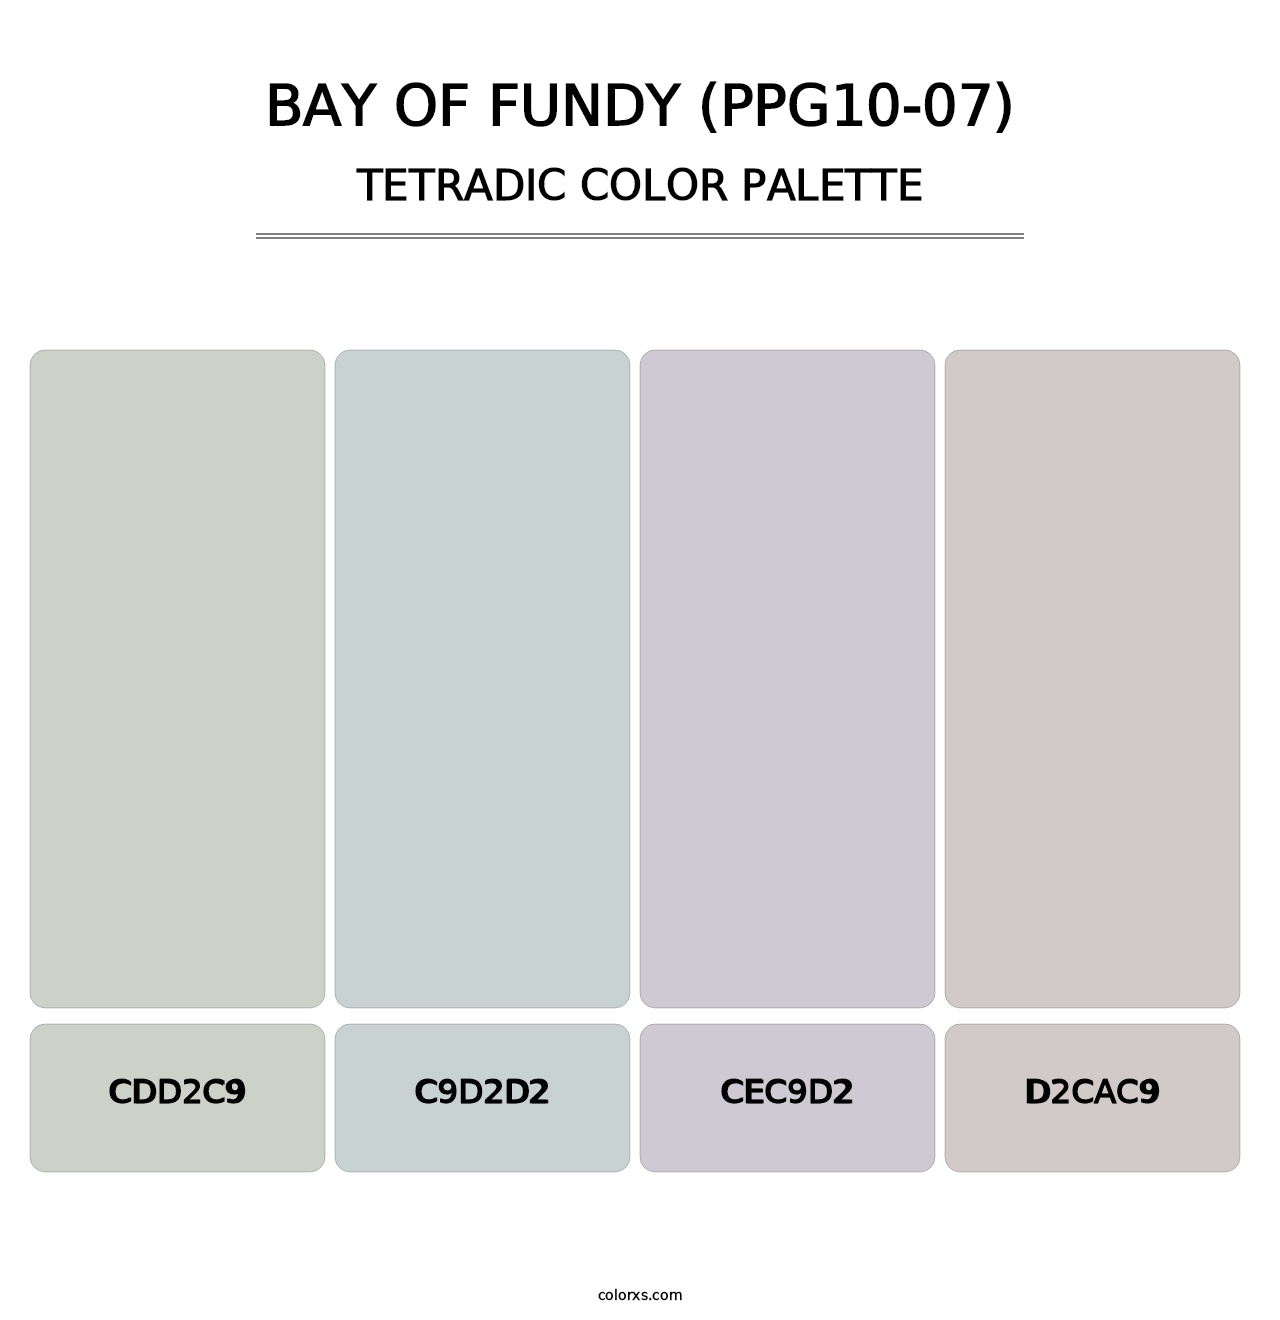 Bay Of Fundy (PPG10-07) - Tetradic Color Palette